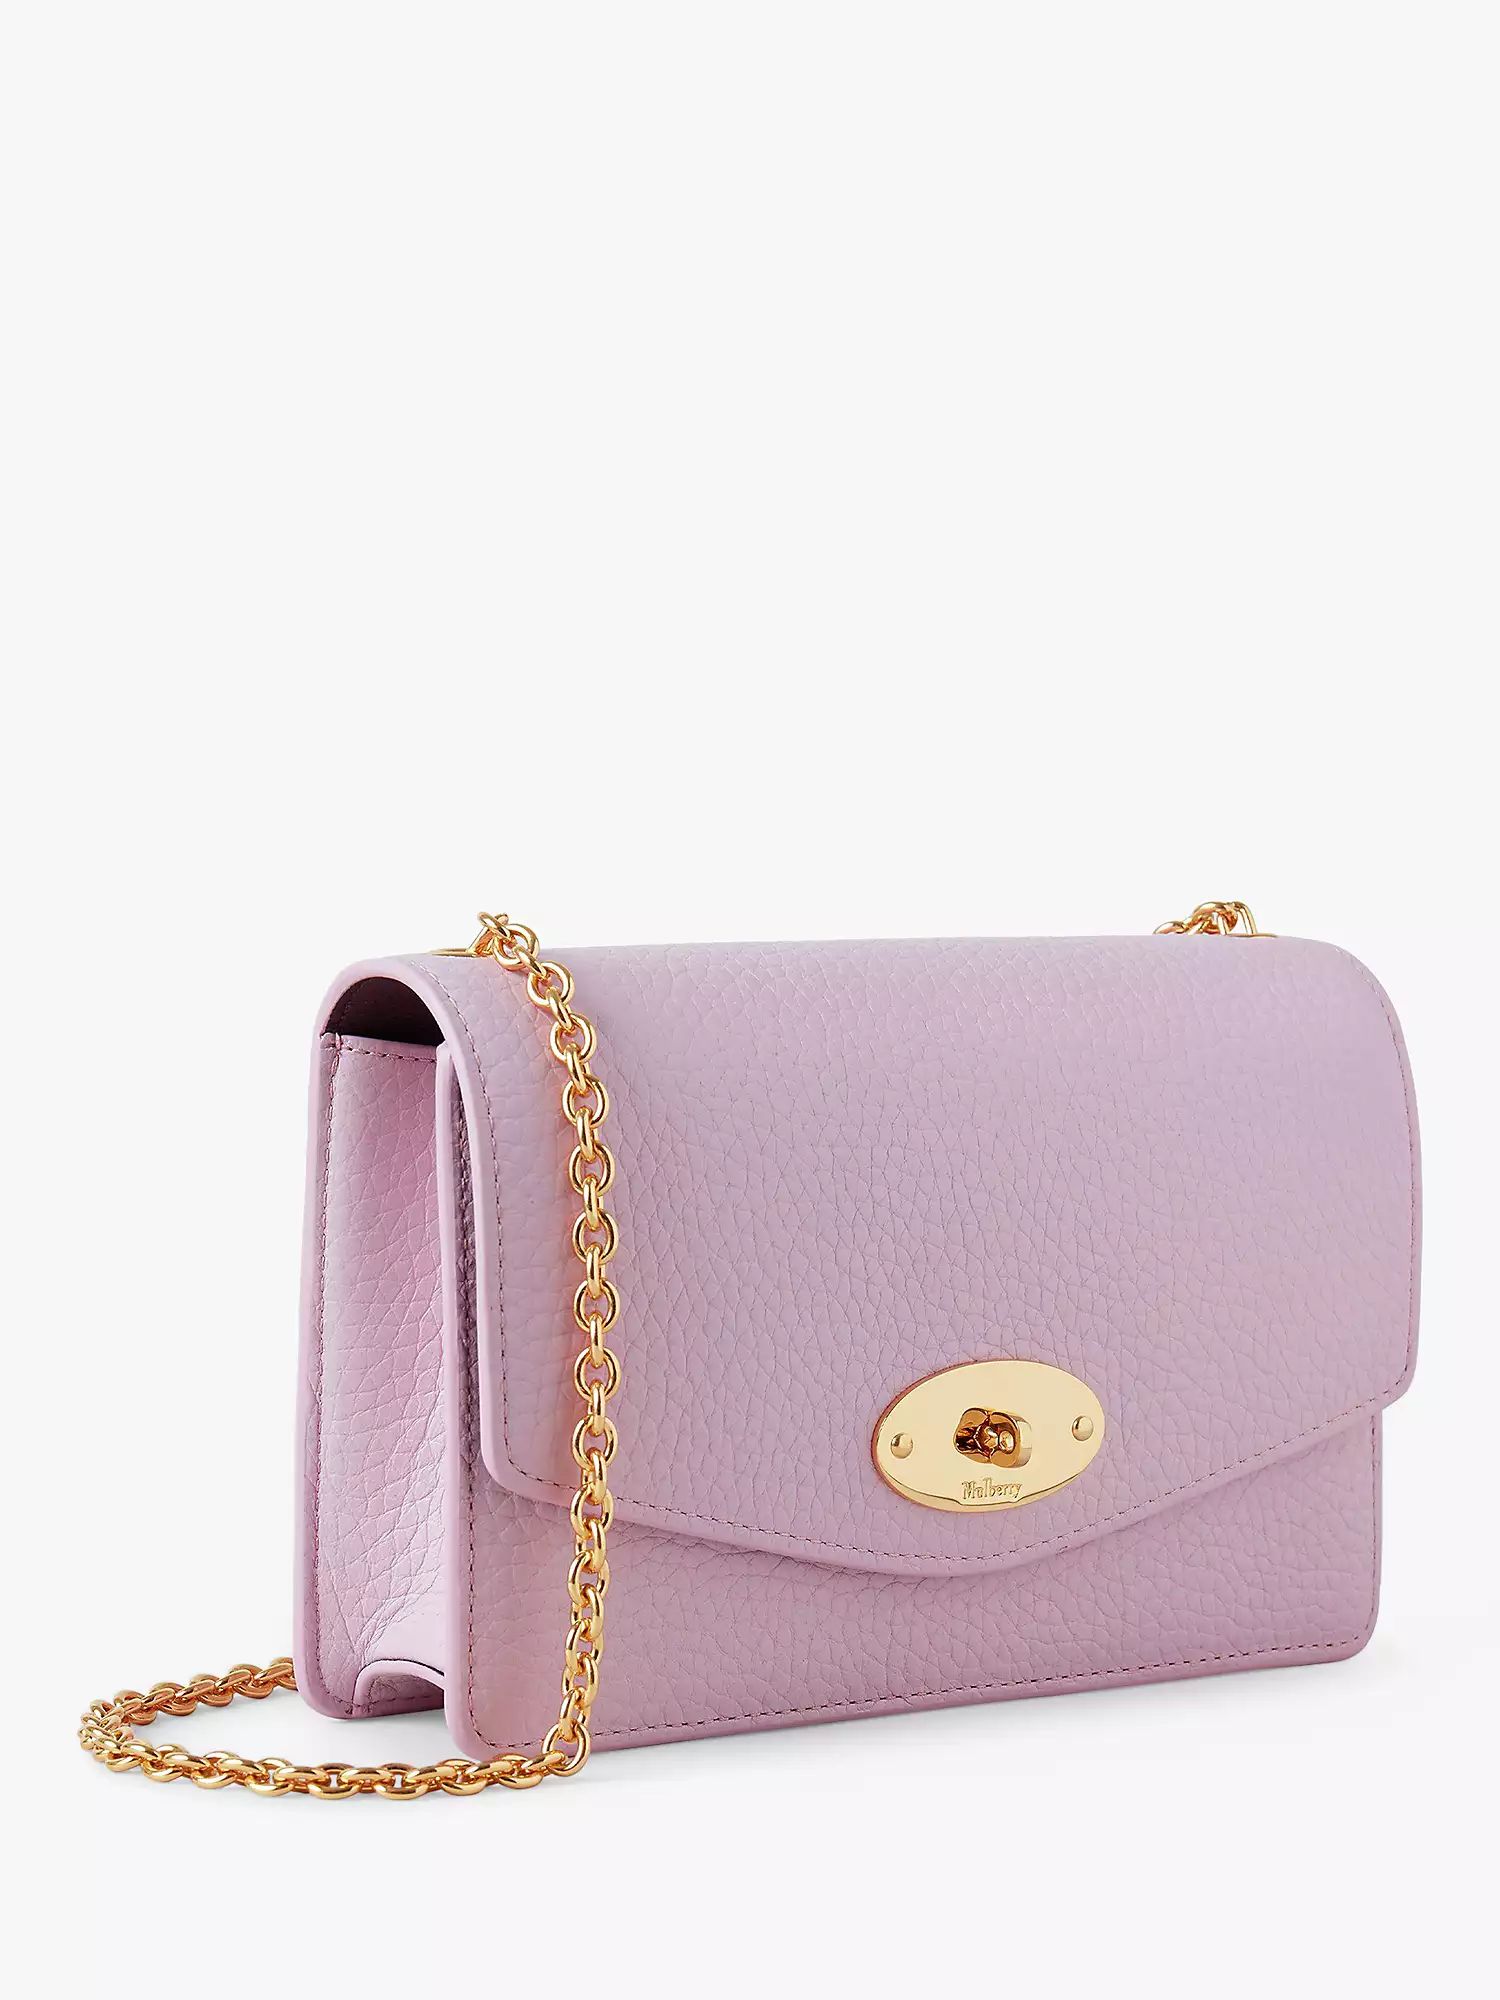 Mulberry Small Darley Heavy Grain Leather Cross Body Bag, Lilac Blossom | John Lewis (UK)